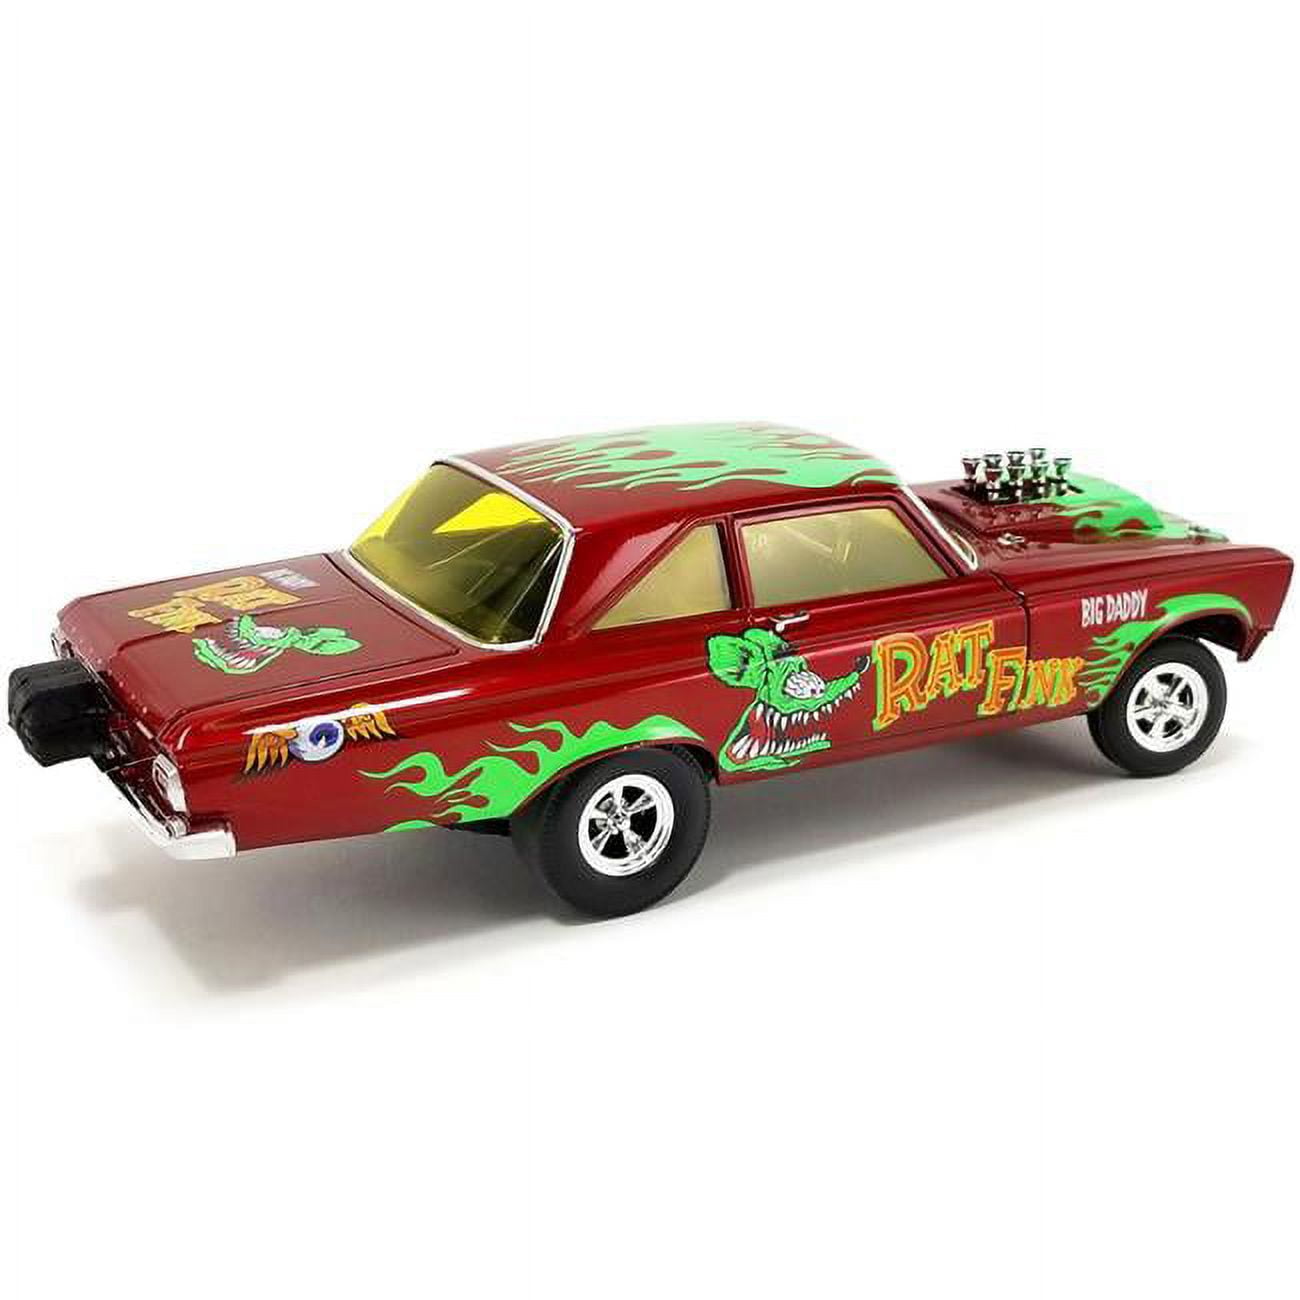 Picture of Acme A1806508 1965 Plymouth AWB Altered Wheel Base Big Daddy Rat Fink with Graphics Limited Edition to Worldwide 1 by 18 Scale Diecast Model Car, Red Metallic - 900 Piece